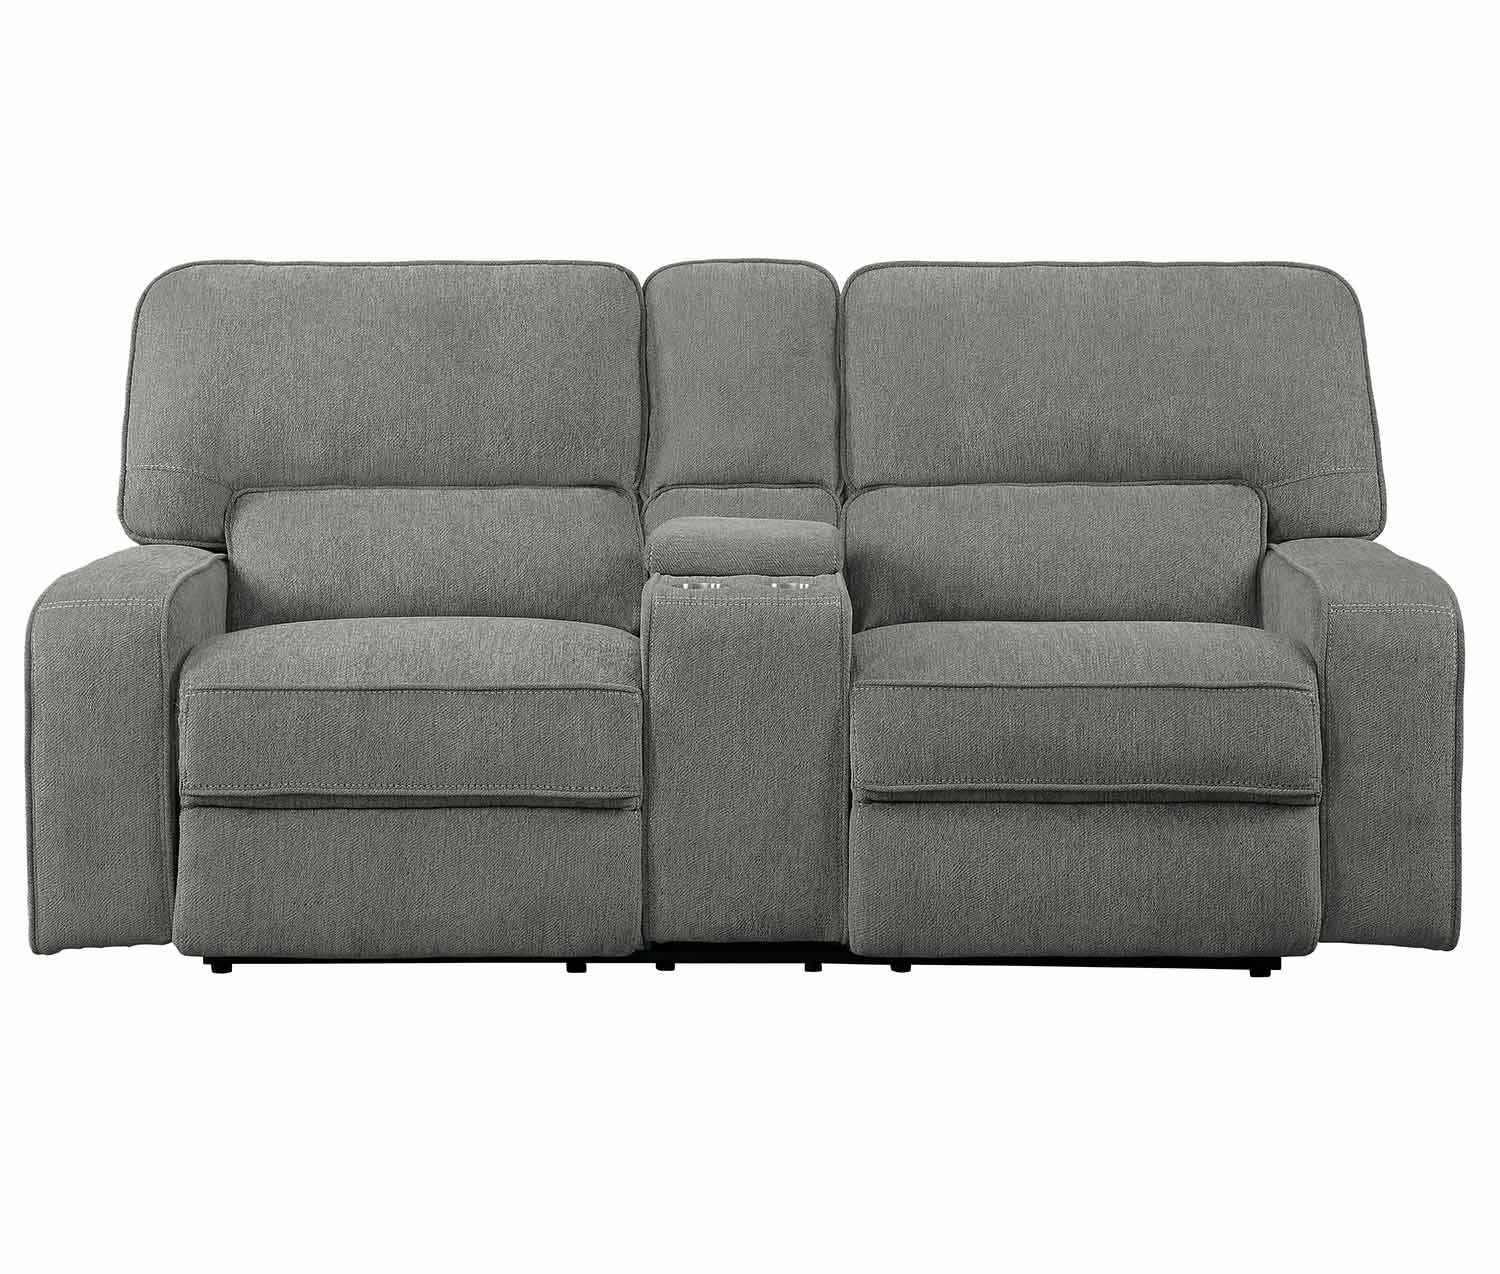 Homelegance Borneo Double Reclining Love Seat with Center Console - Mocha